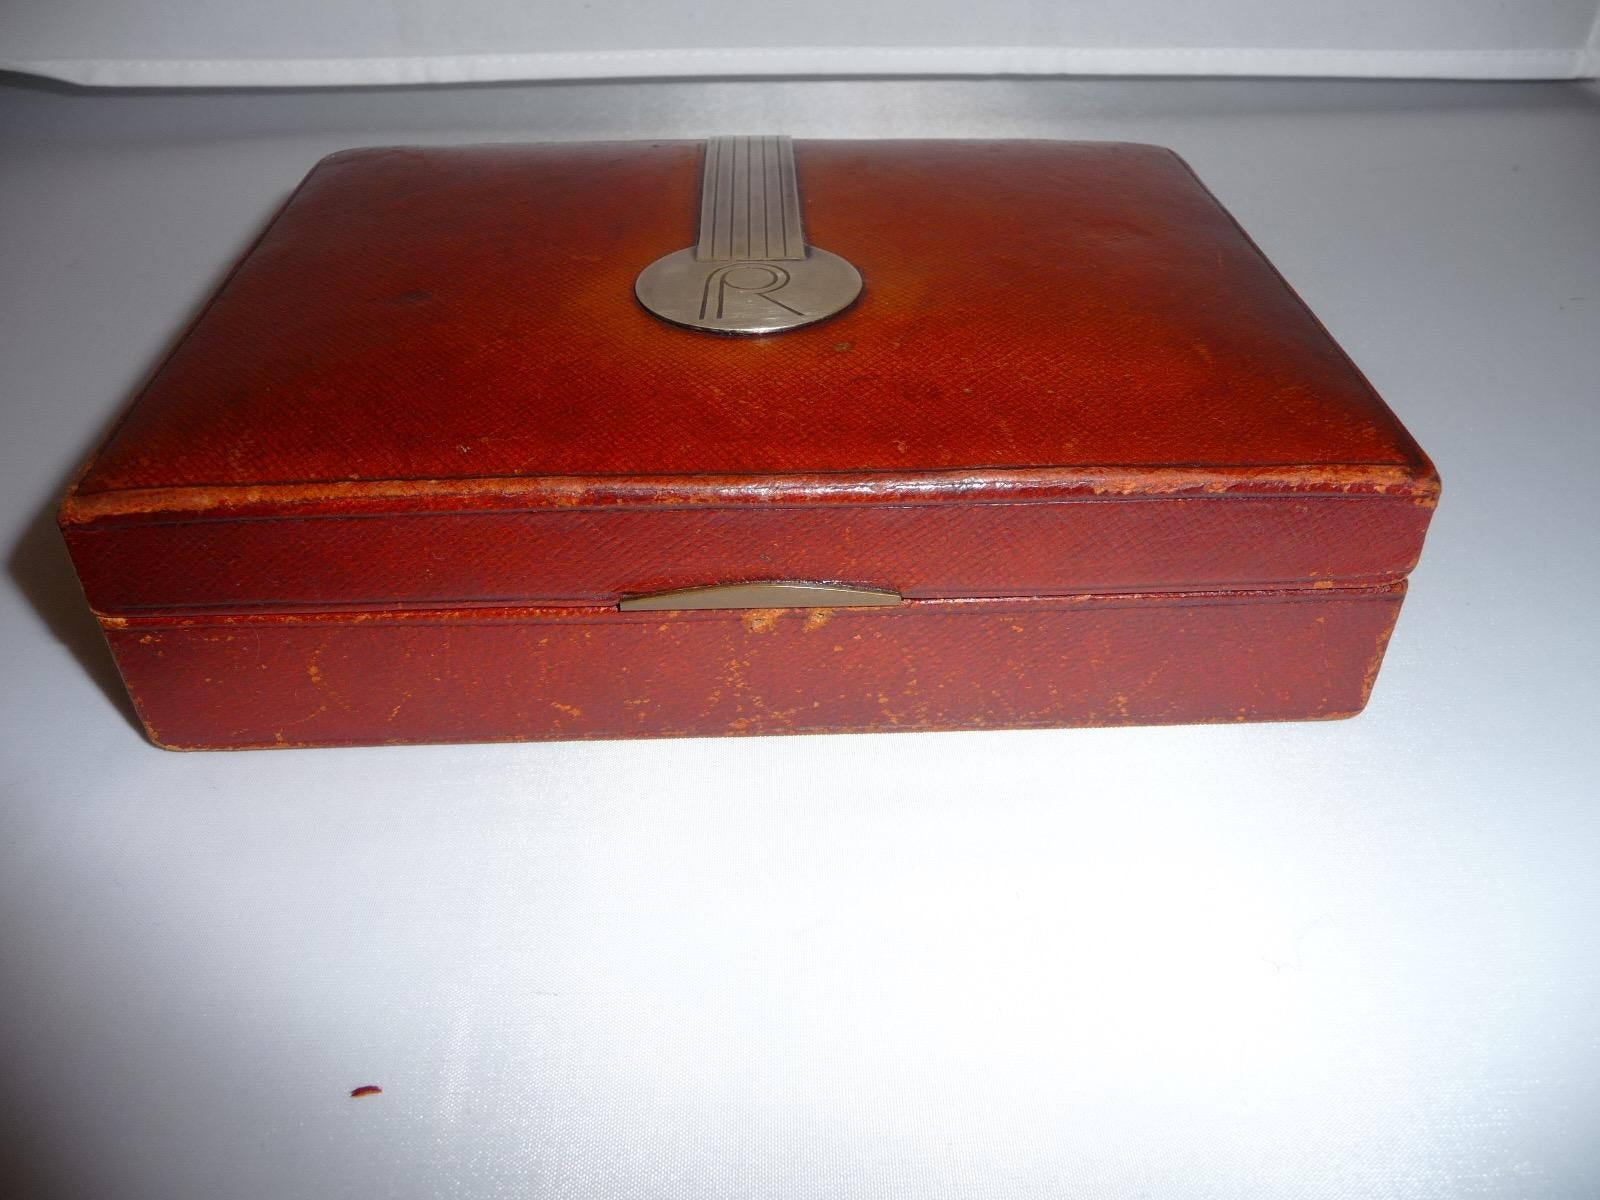 French Art Deco wooden leather box by Jean Emile Puiforcat, Paris. The wooden box is covered with red brown colored leather .The box is signed in the silver application on the lid Jean E.Puiforcat, workshop mark, boar´s head (embossed). It was